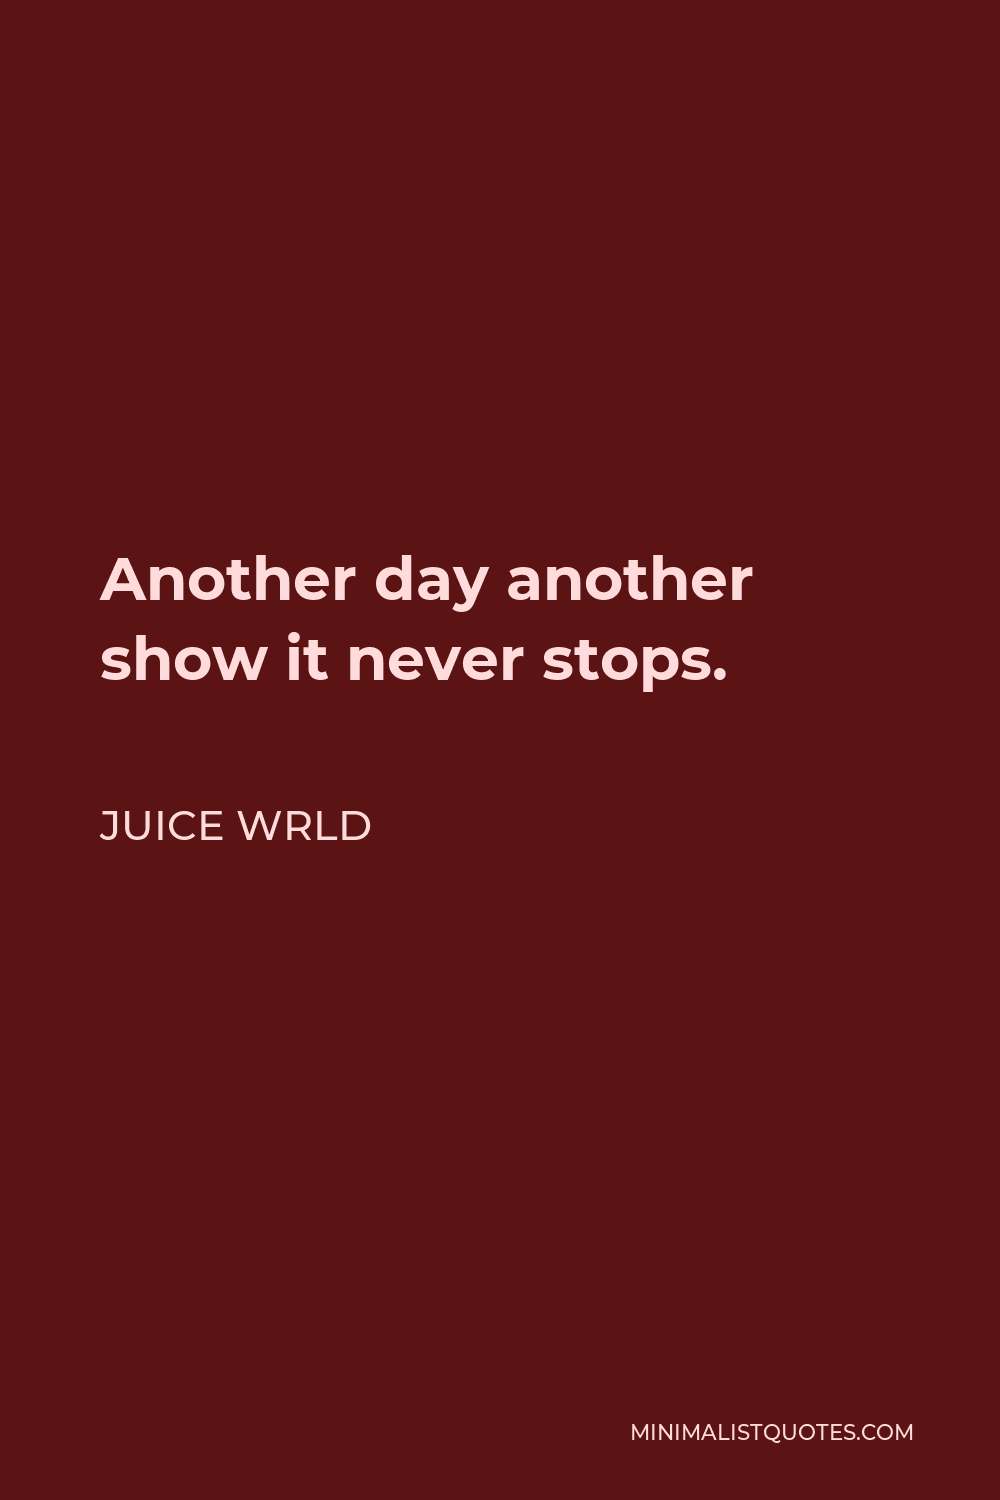 Juice Wrld Quote - Another day another show it never stops.